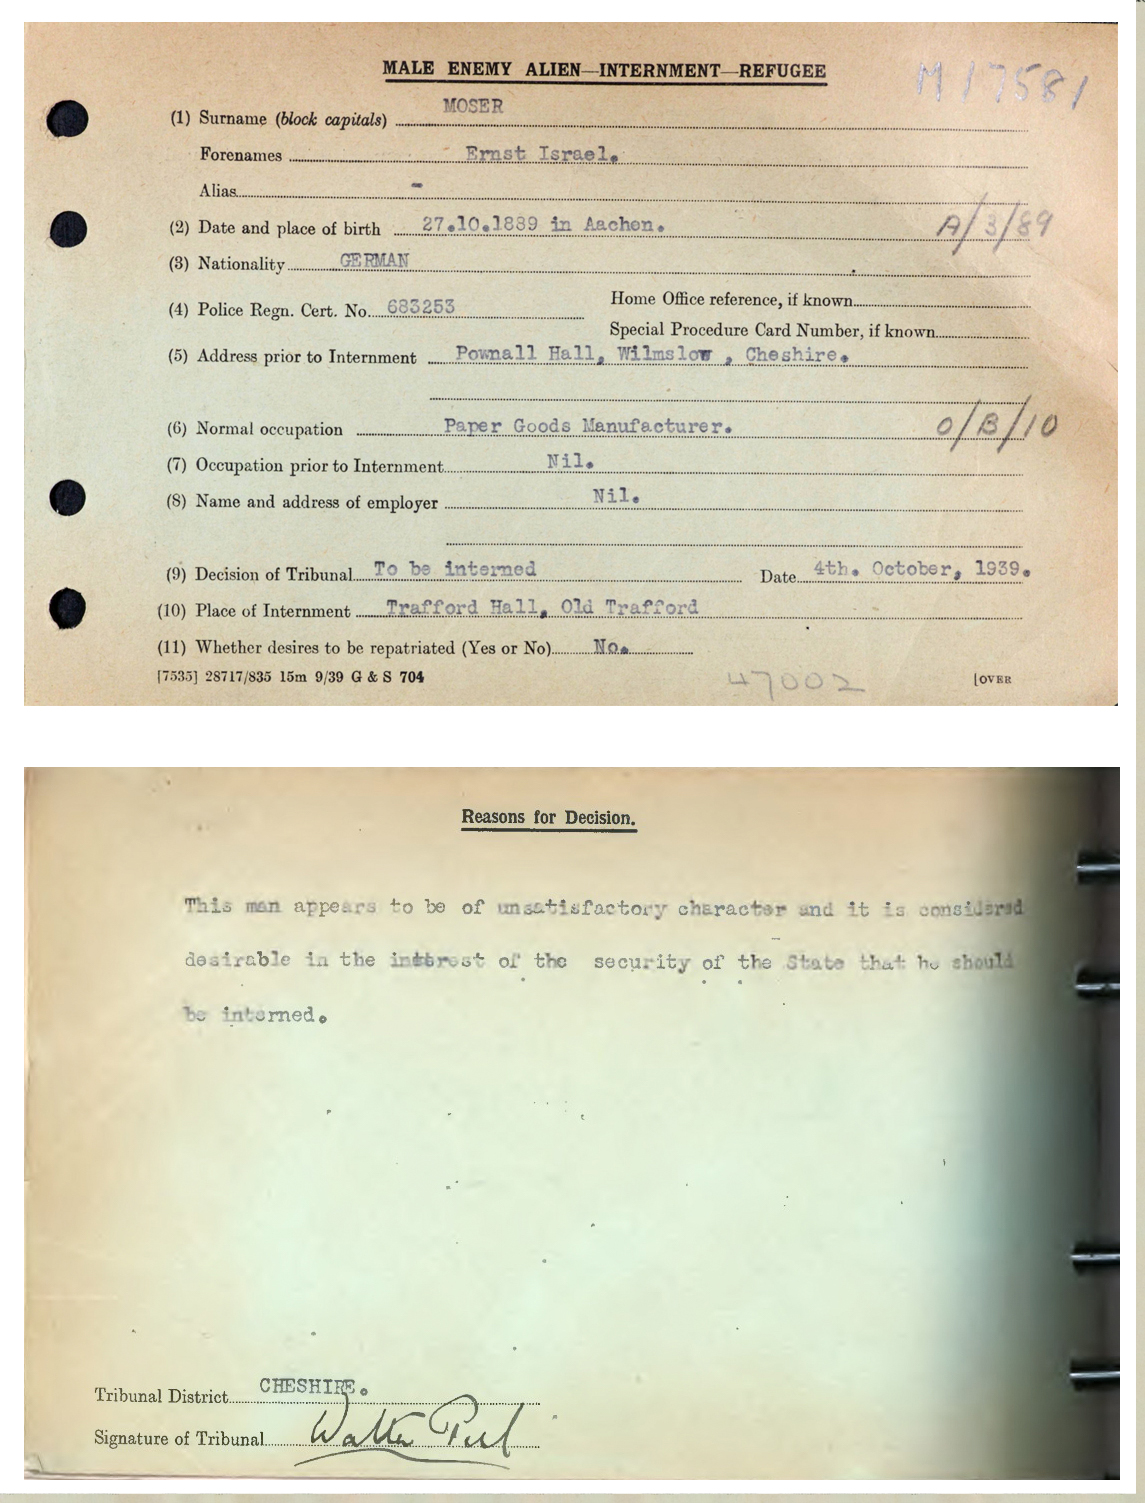 Internment papers for Ernst Israel Moser.